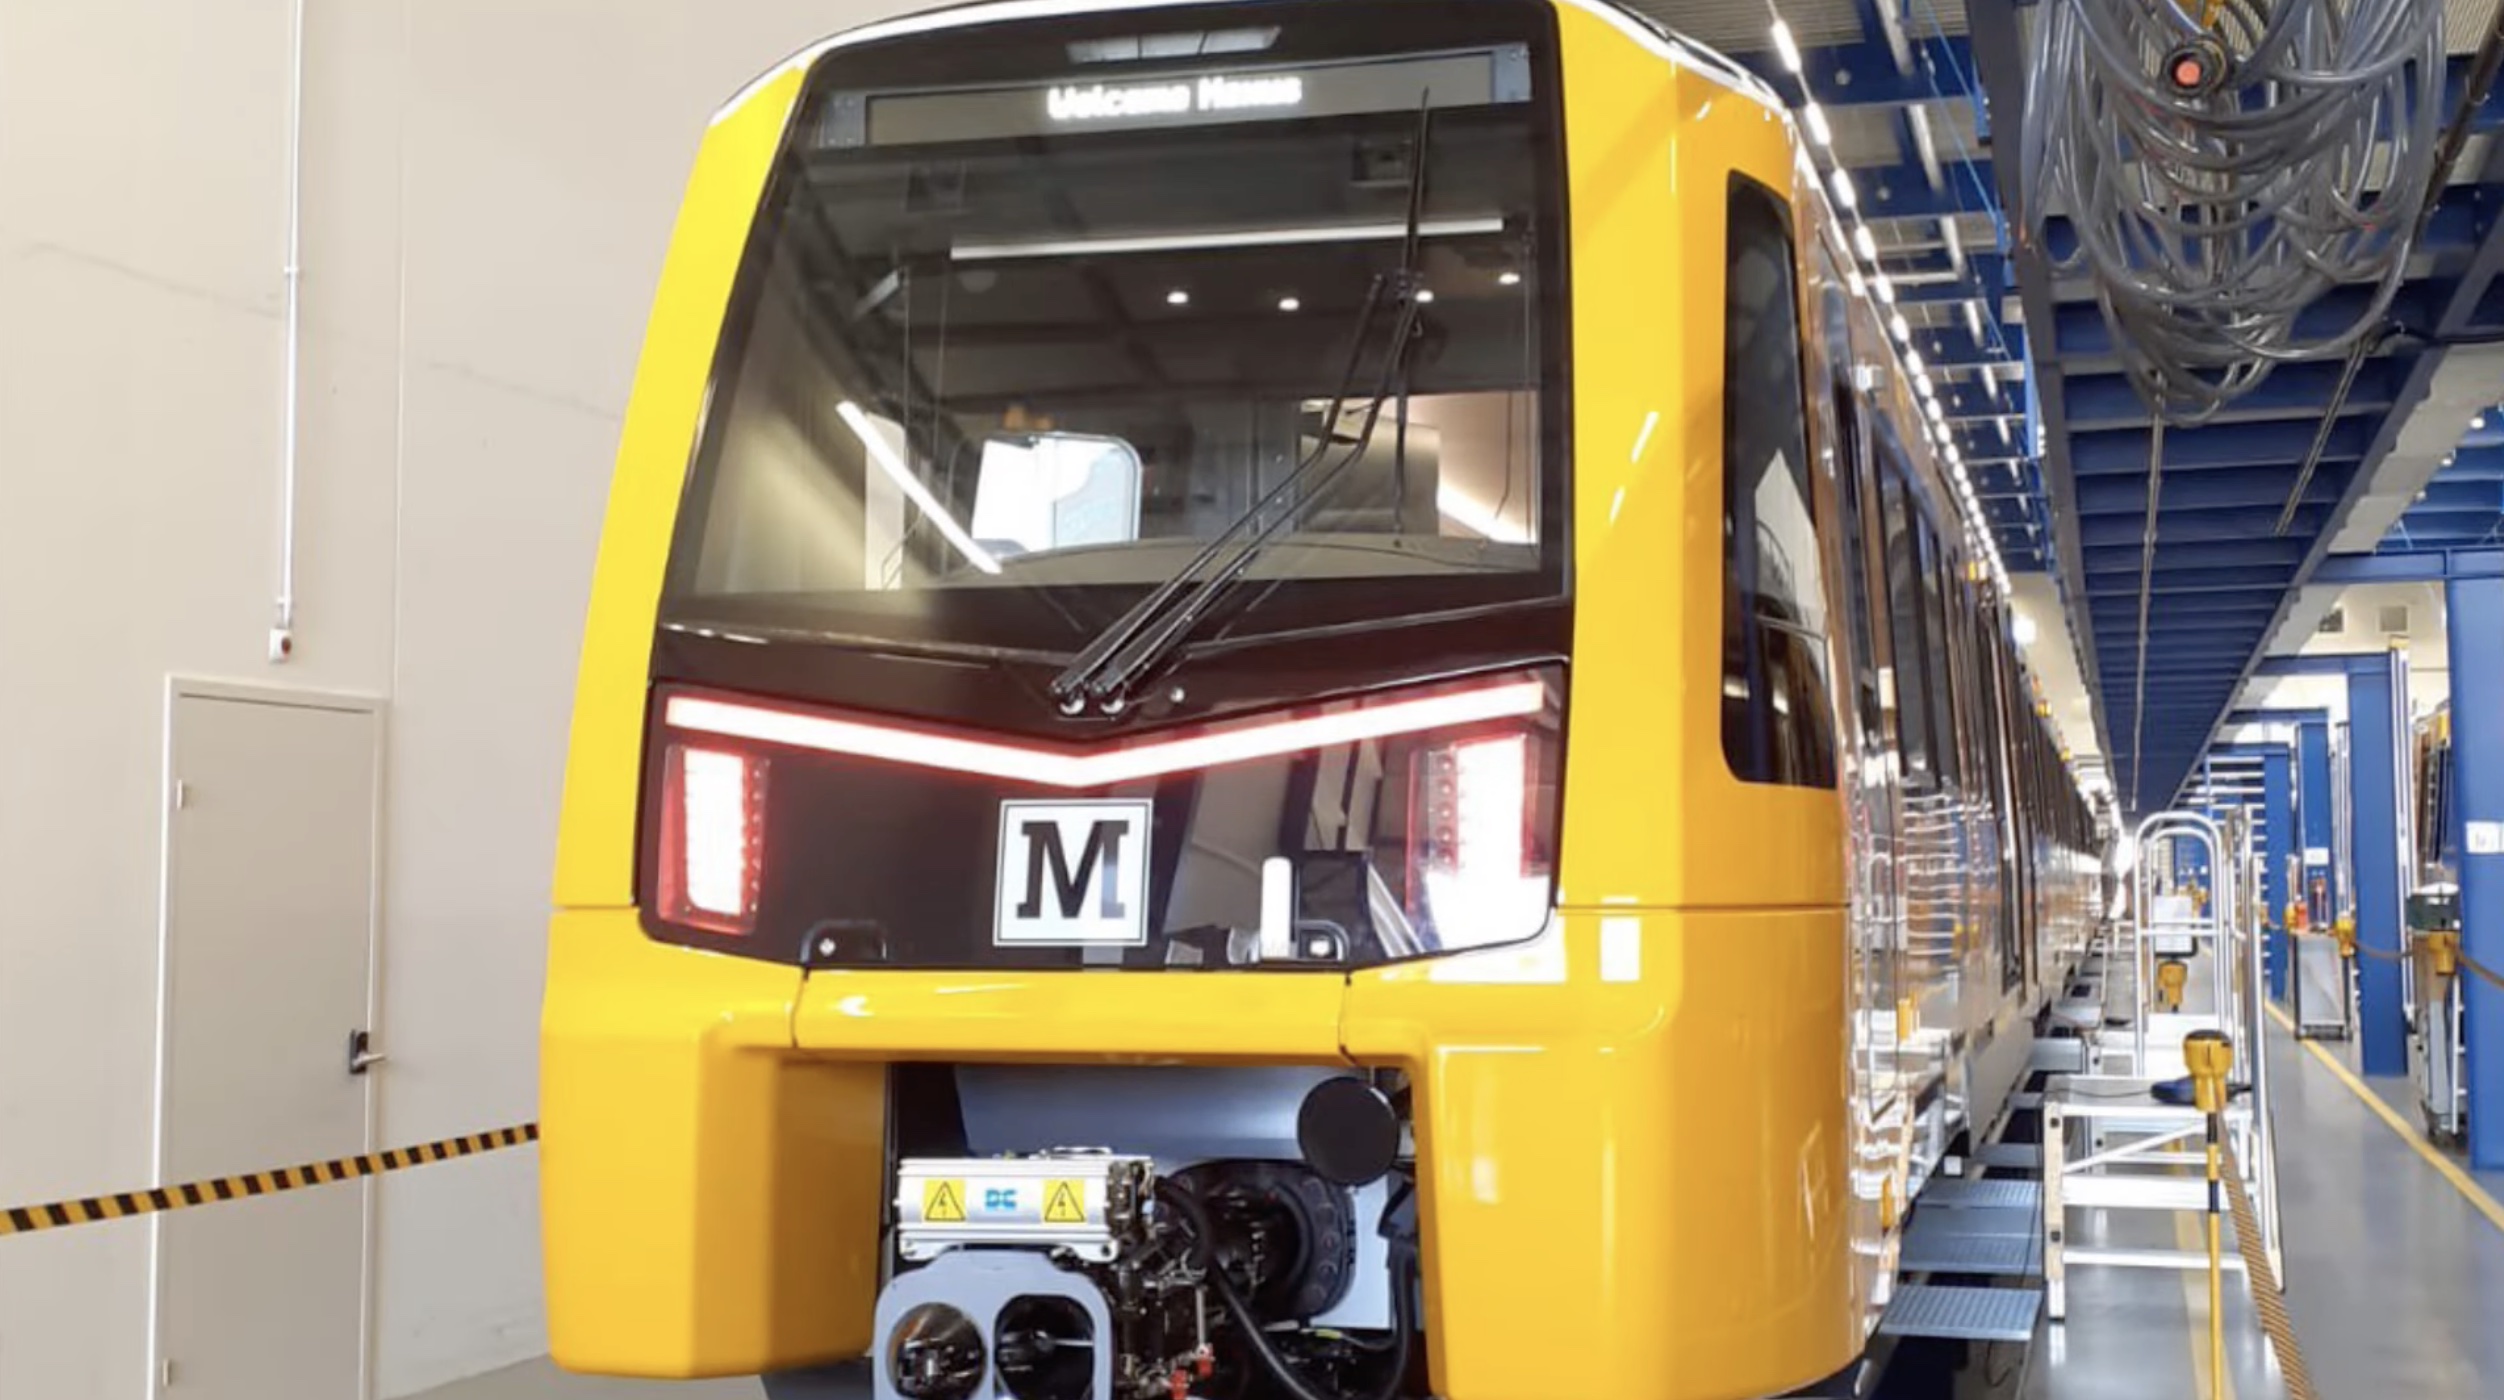 The new Class 555 Metro trains at the Stadler factory in Switzerland